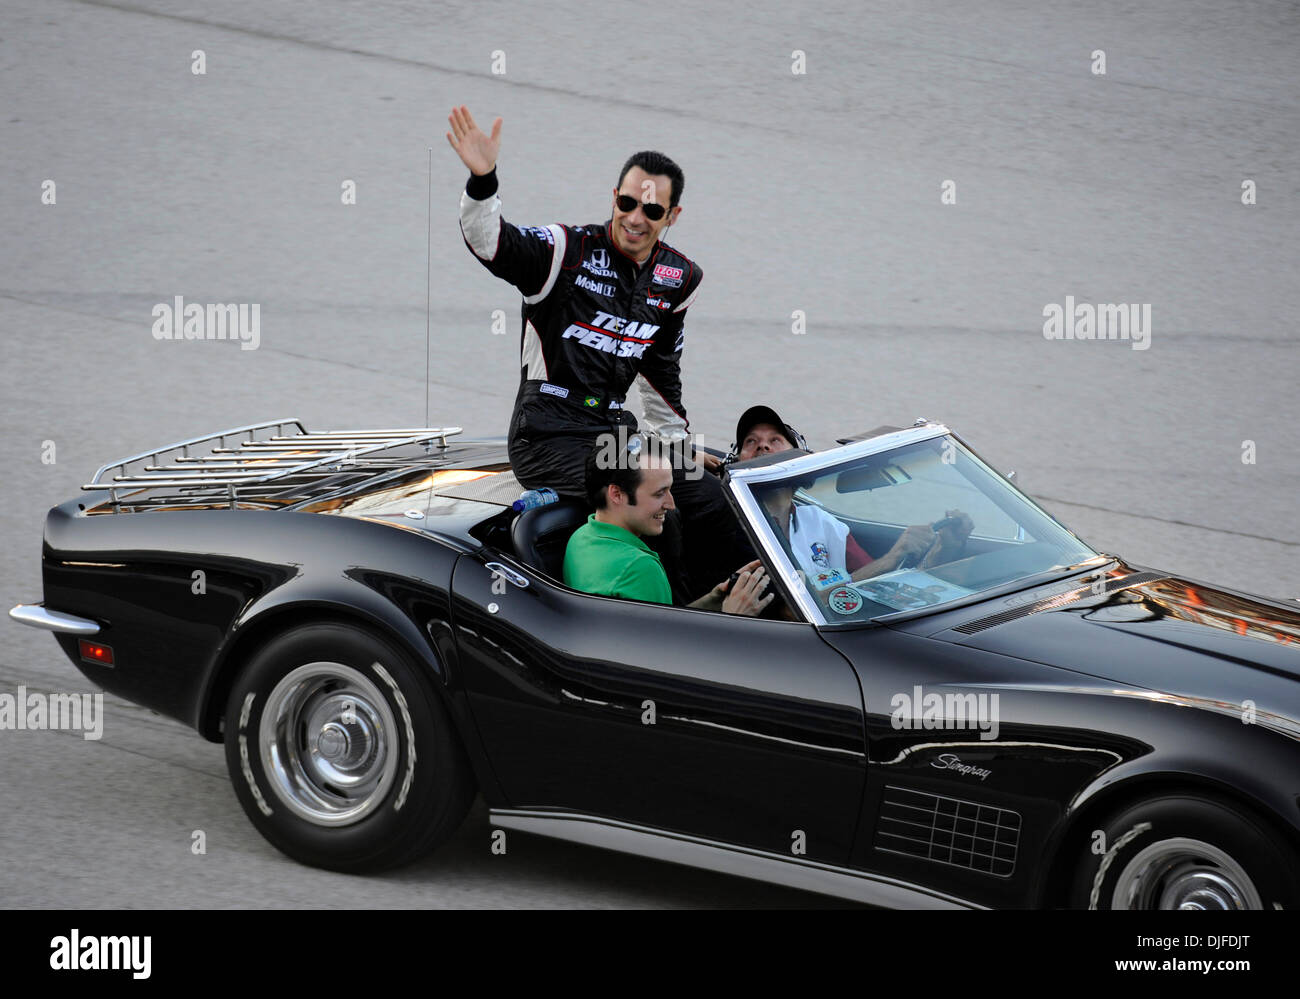 Helio Castroneves waves to the crowd before the IZOD IndyCar Series Firestone 550k at Texas Motor Speedway in Fort Worth, Texas.  Ryan Briscoe of Team Penske won the IZOD IndyCar Series 550k (Credit Image: © Albert Pena/Southcreek Global/ZUMApress.com) Stock Photo